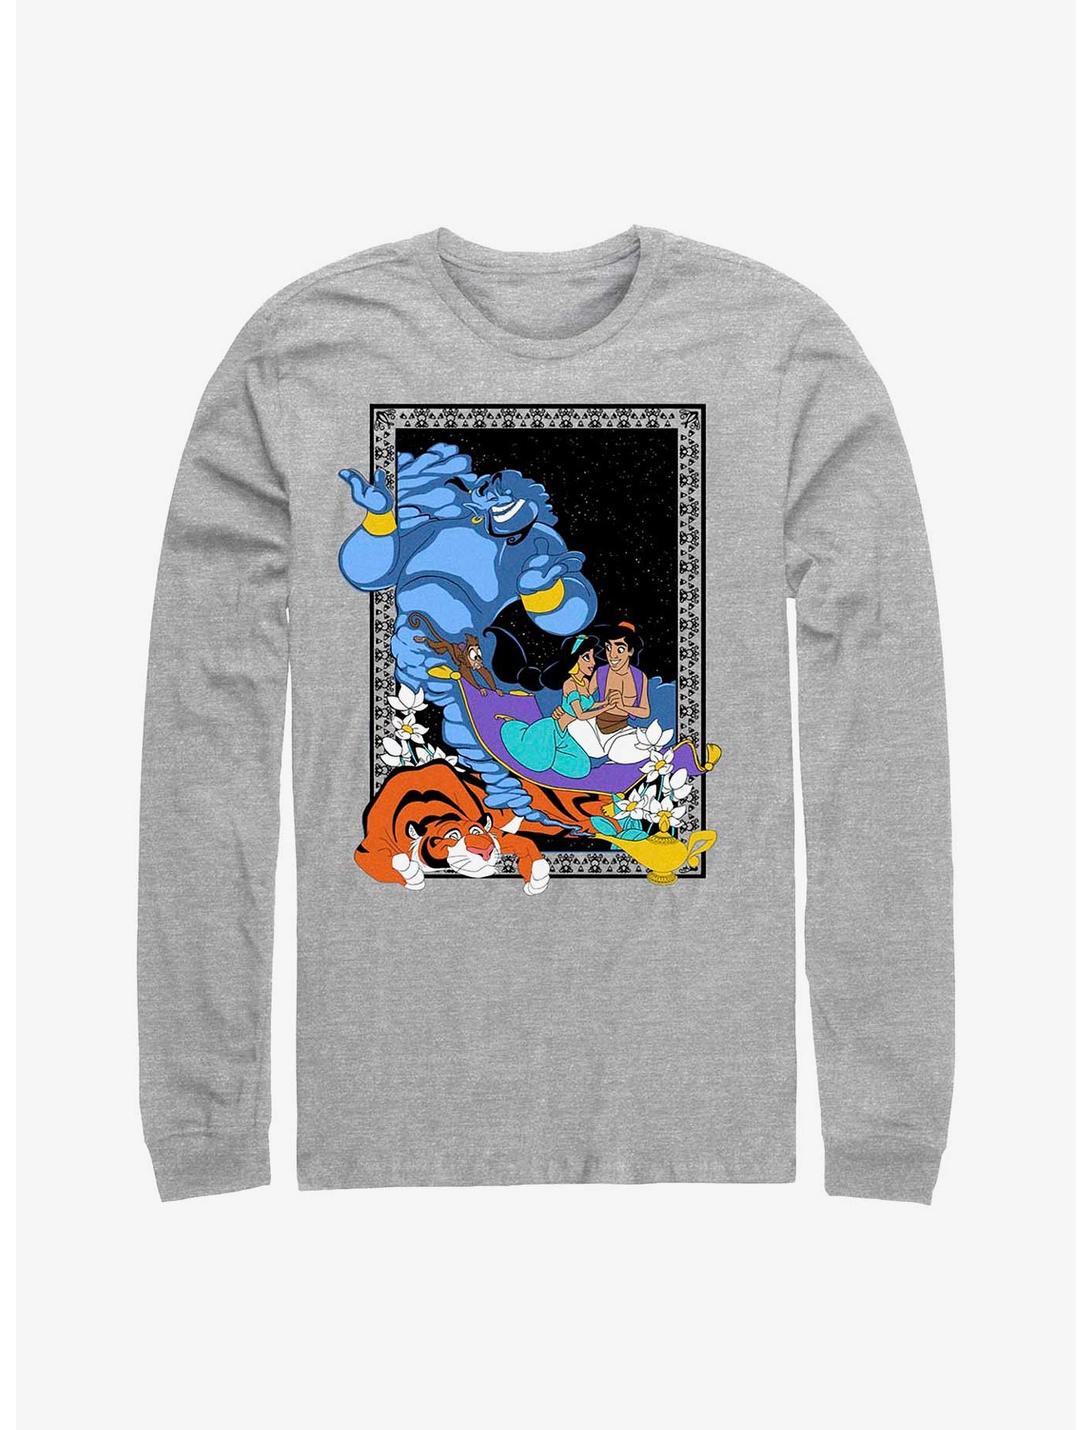 Disney Aladdin Poster in the Lamp Long-Sleeve T-Shirt, ATH HTR, hi-res